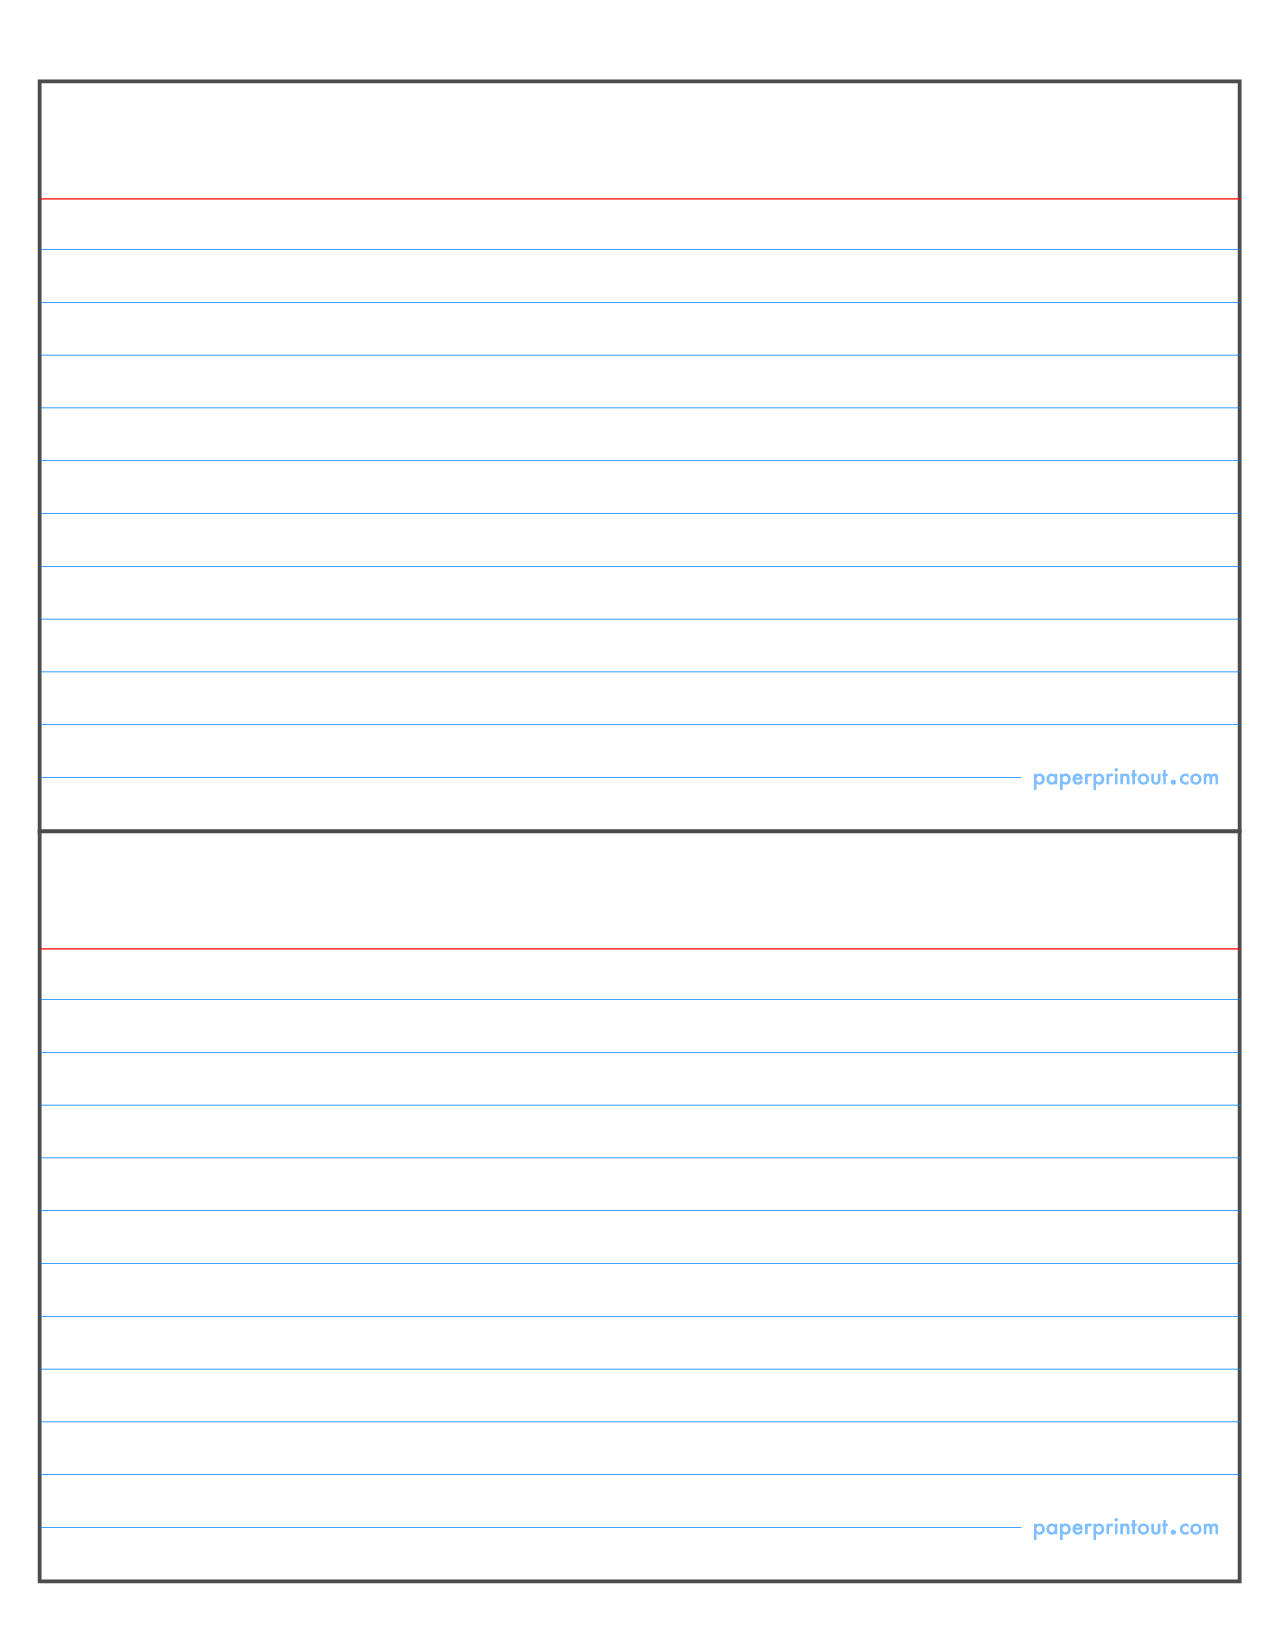 3X5 Index Card Template For Microsoft Word - Falep For Index Card Template For Pages